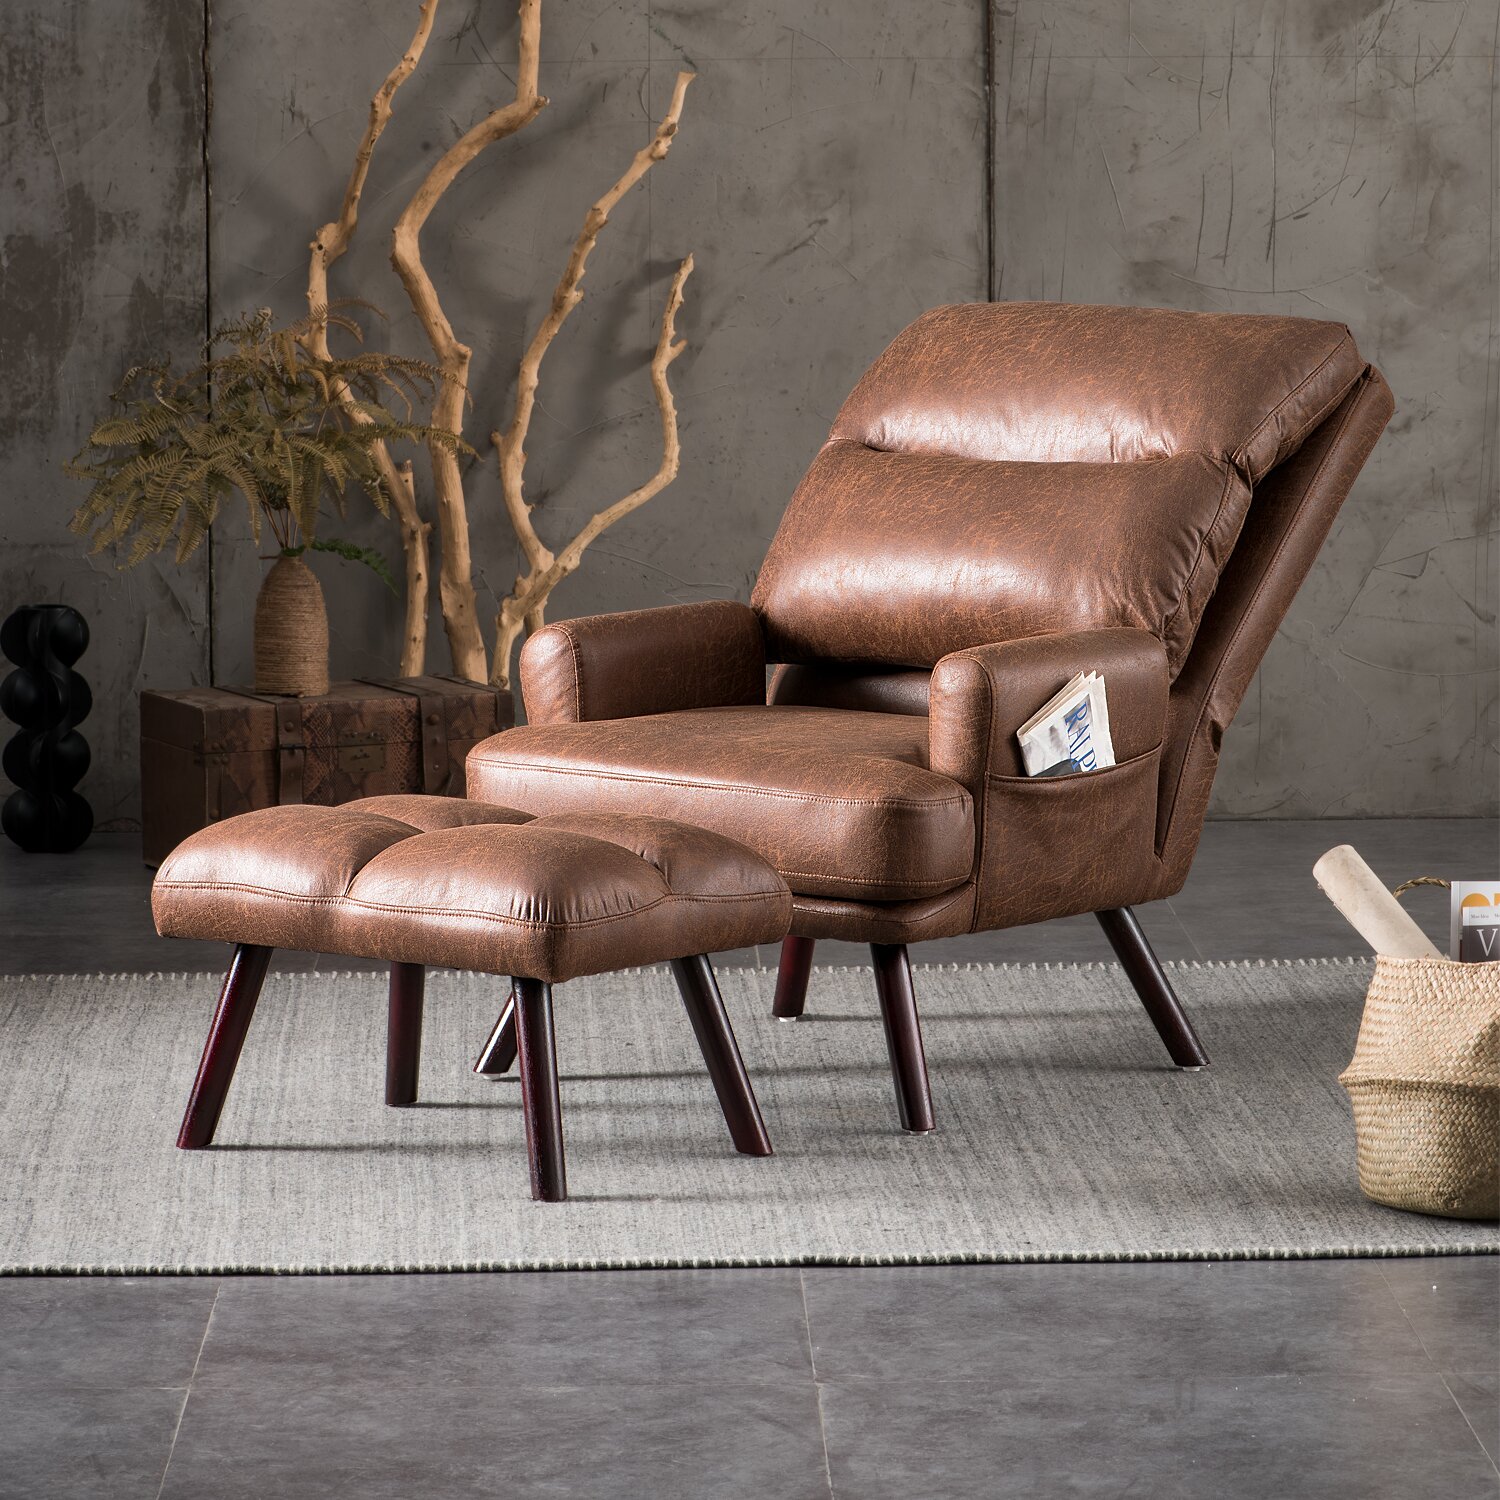 Leather Recliner Chair With Ottoman, Modern Leather Recliner With Ottoman